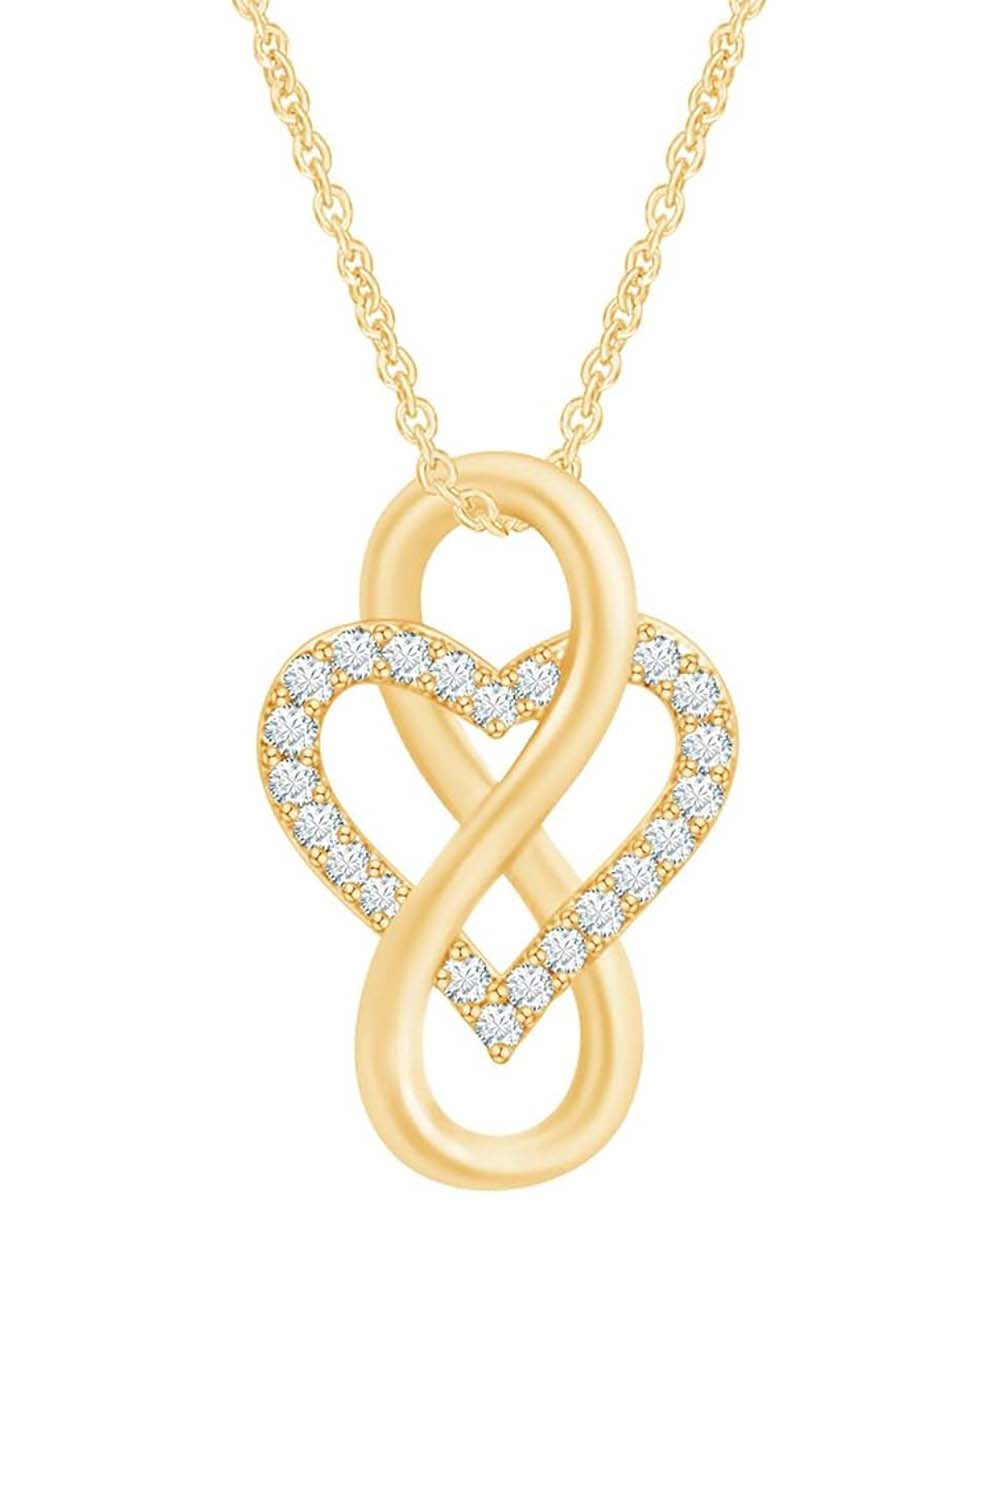 Yellow Gold Color Classy Moissanite Diamond Heart Infinity Pendant Necklace 